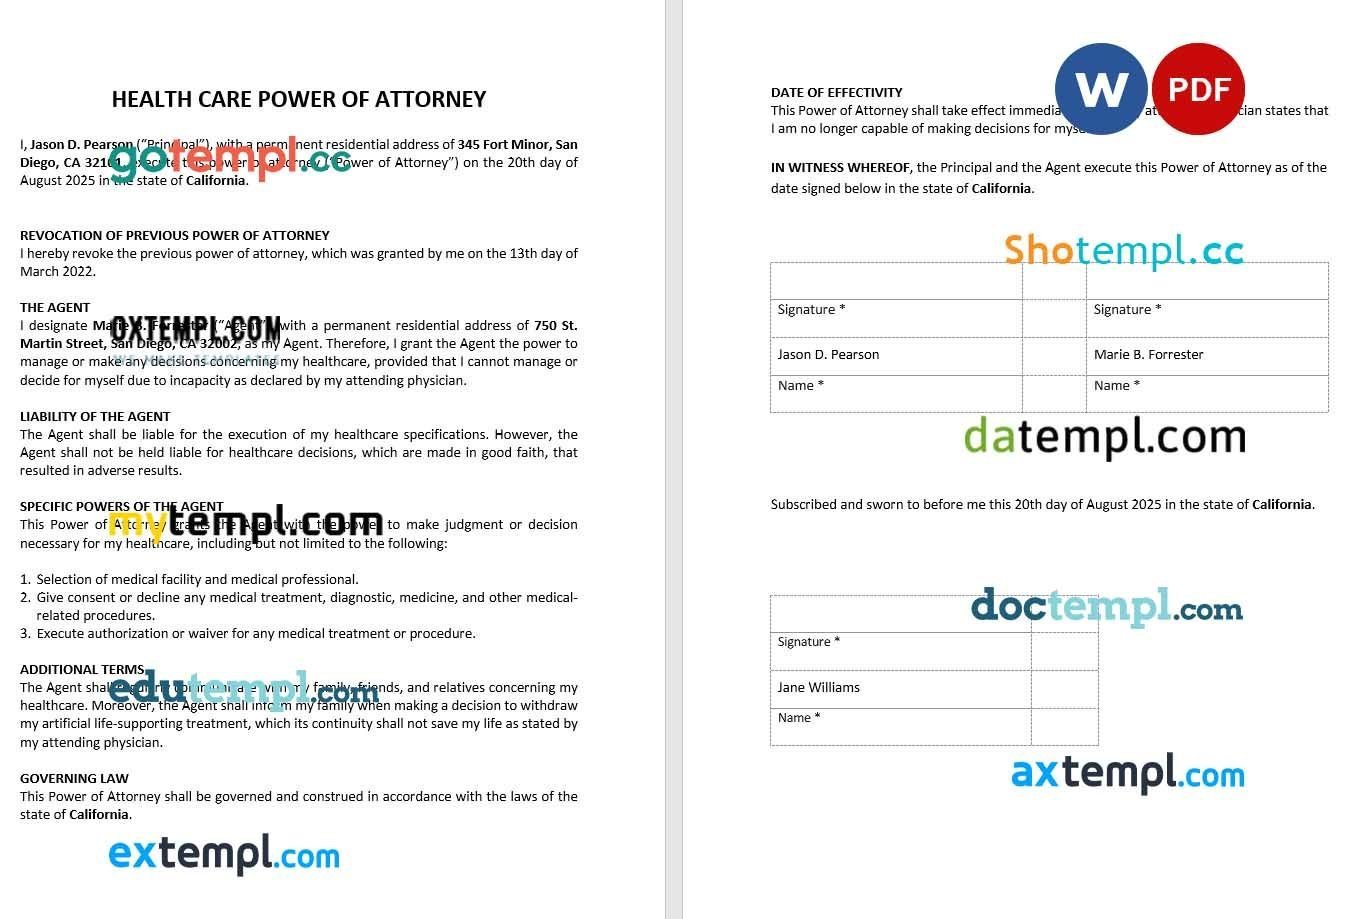 Health Care Power of Attorney example, fully editable